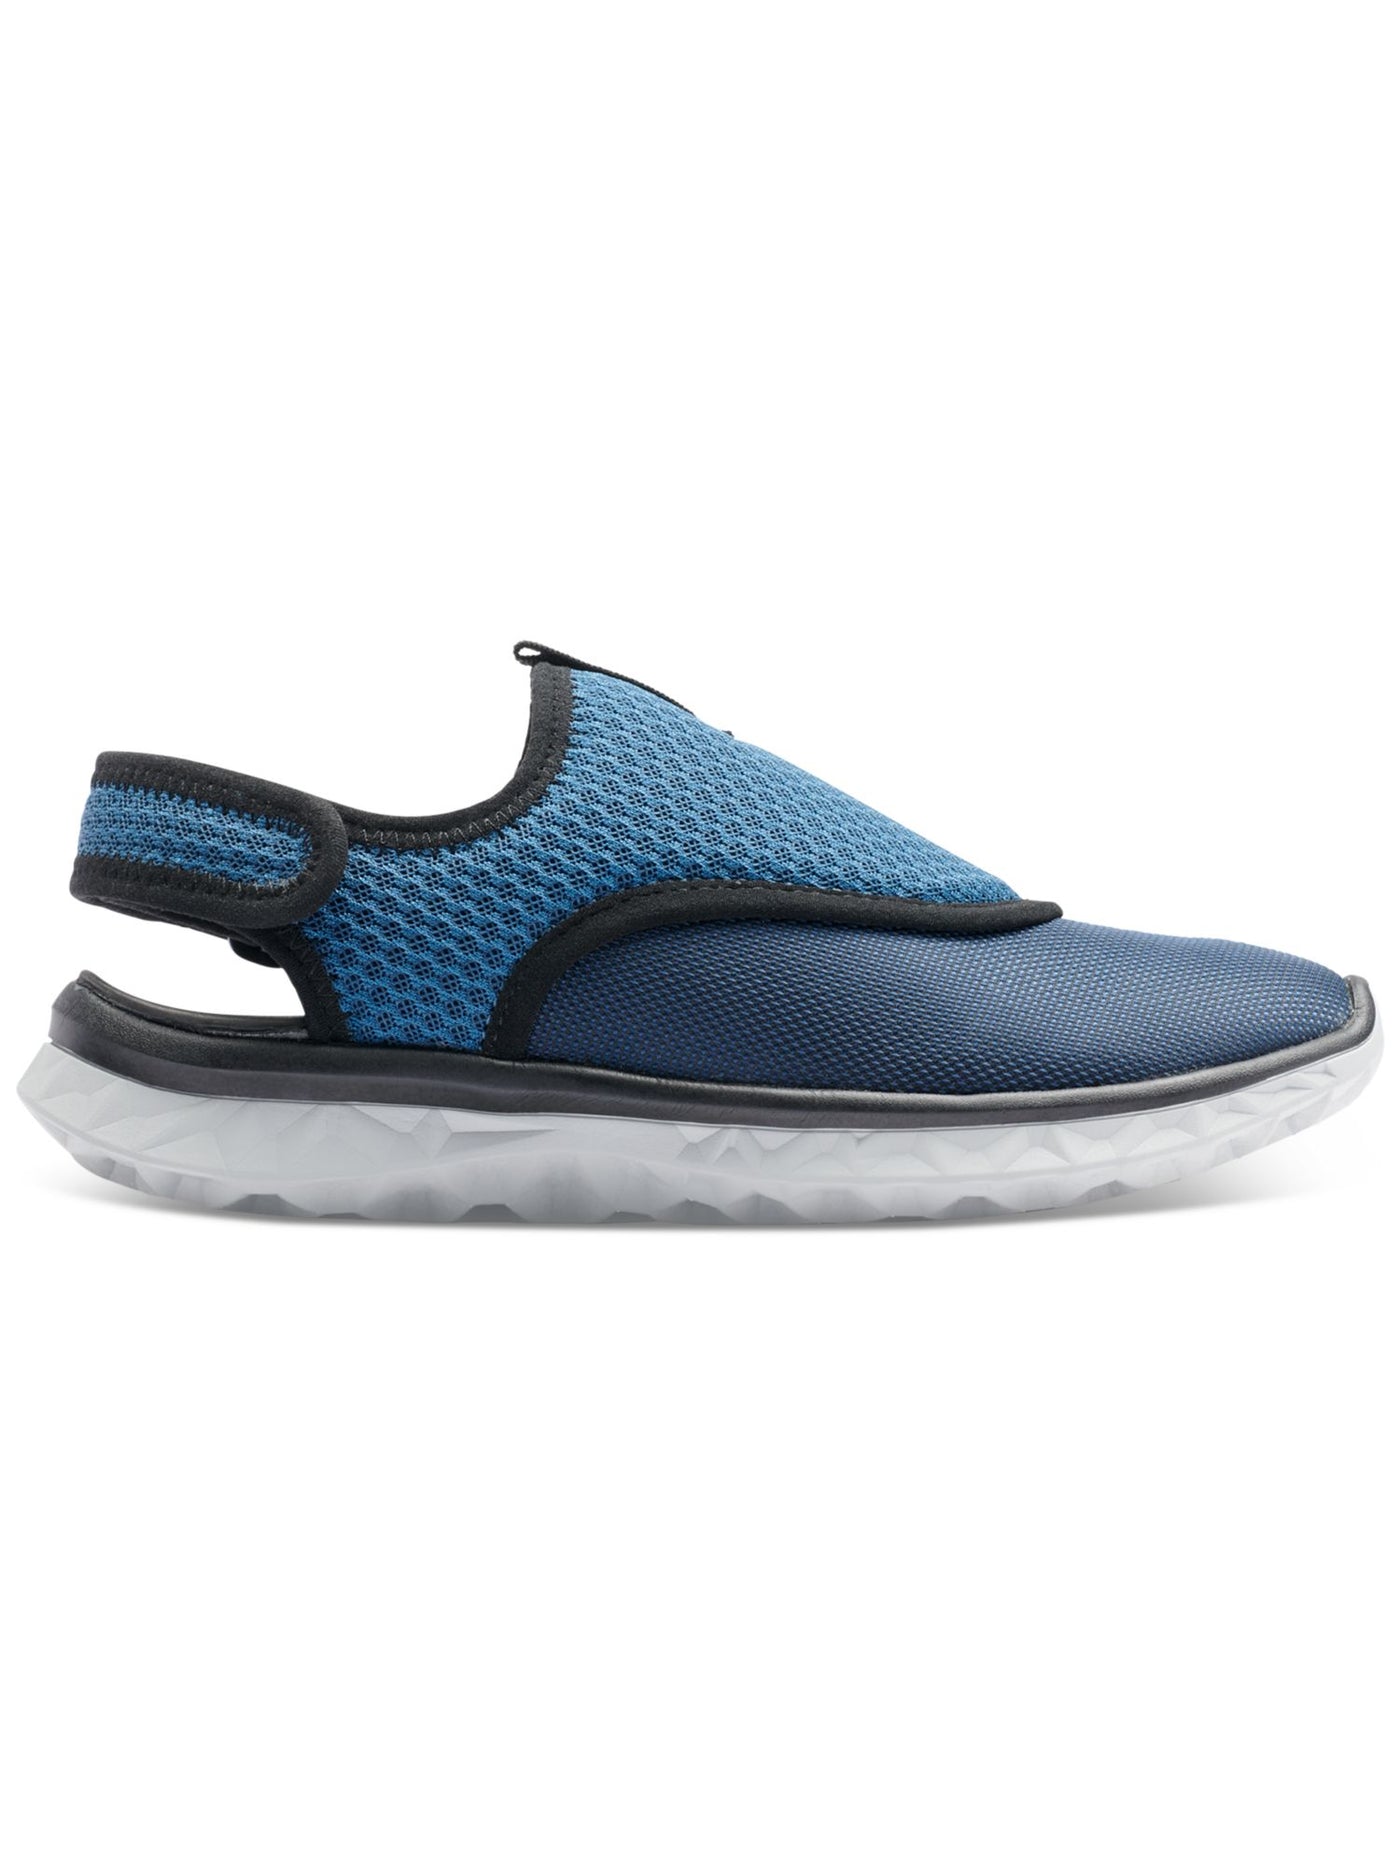 BASS OUTDOOR Womens Blue Cushioned Removable Insole Hex Round Toe Slip On Sneakers Shoes 6